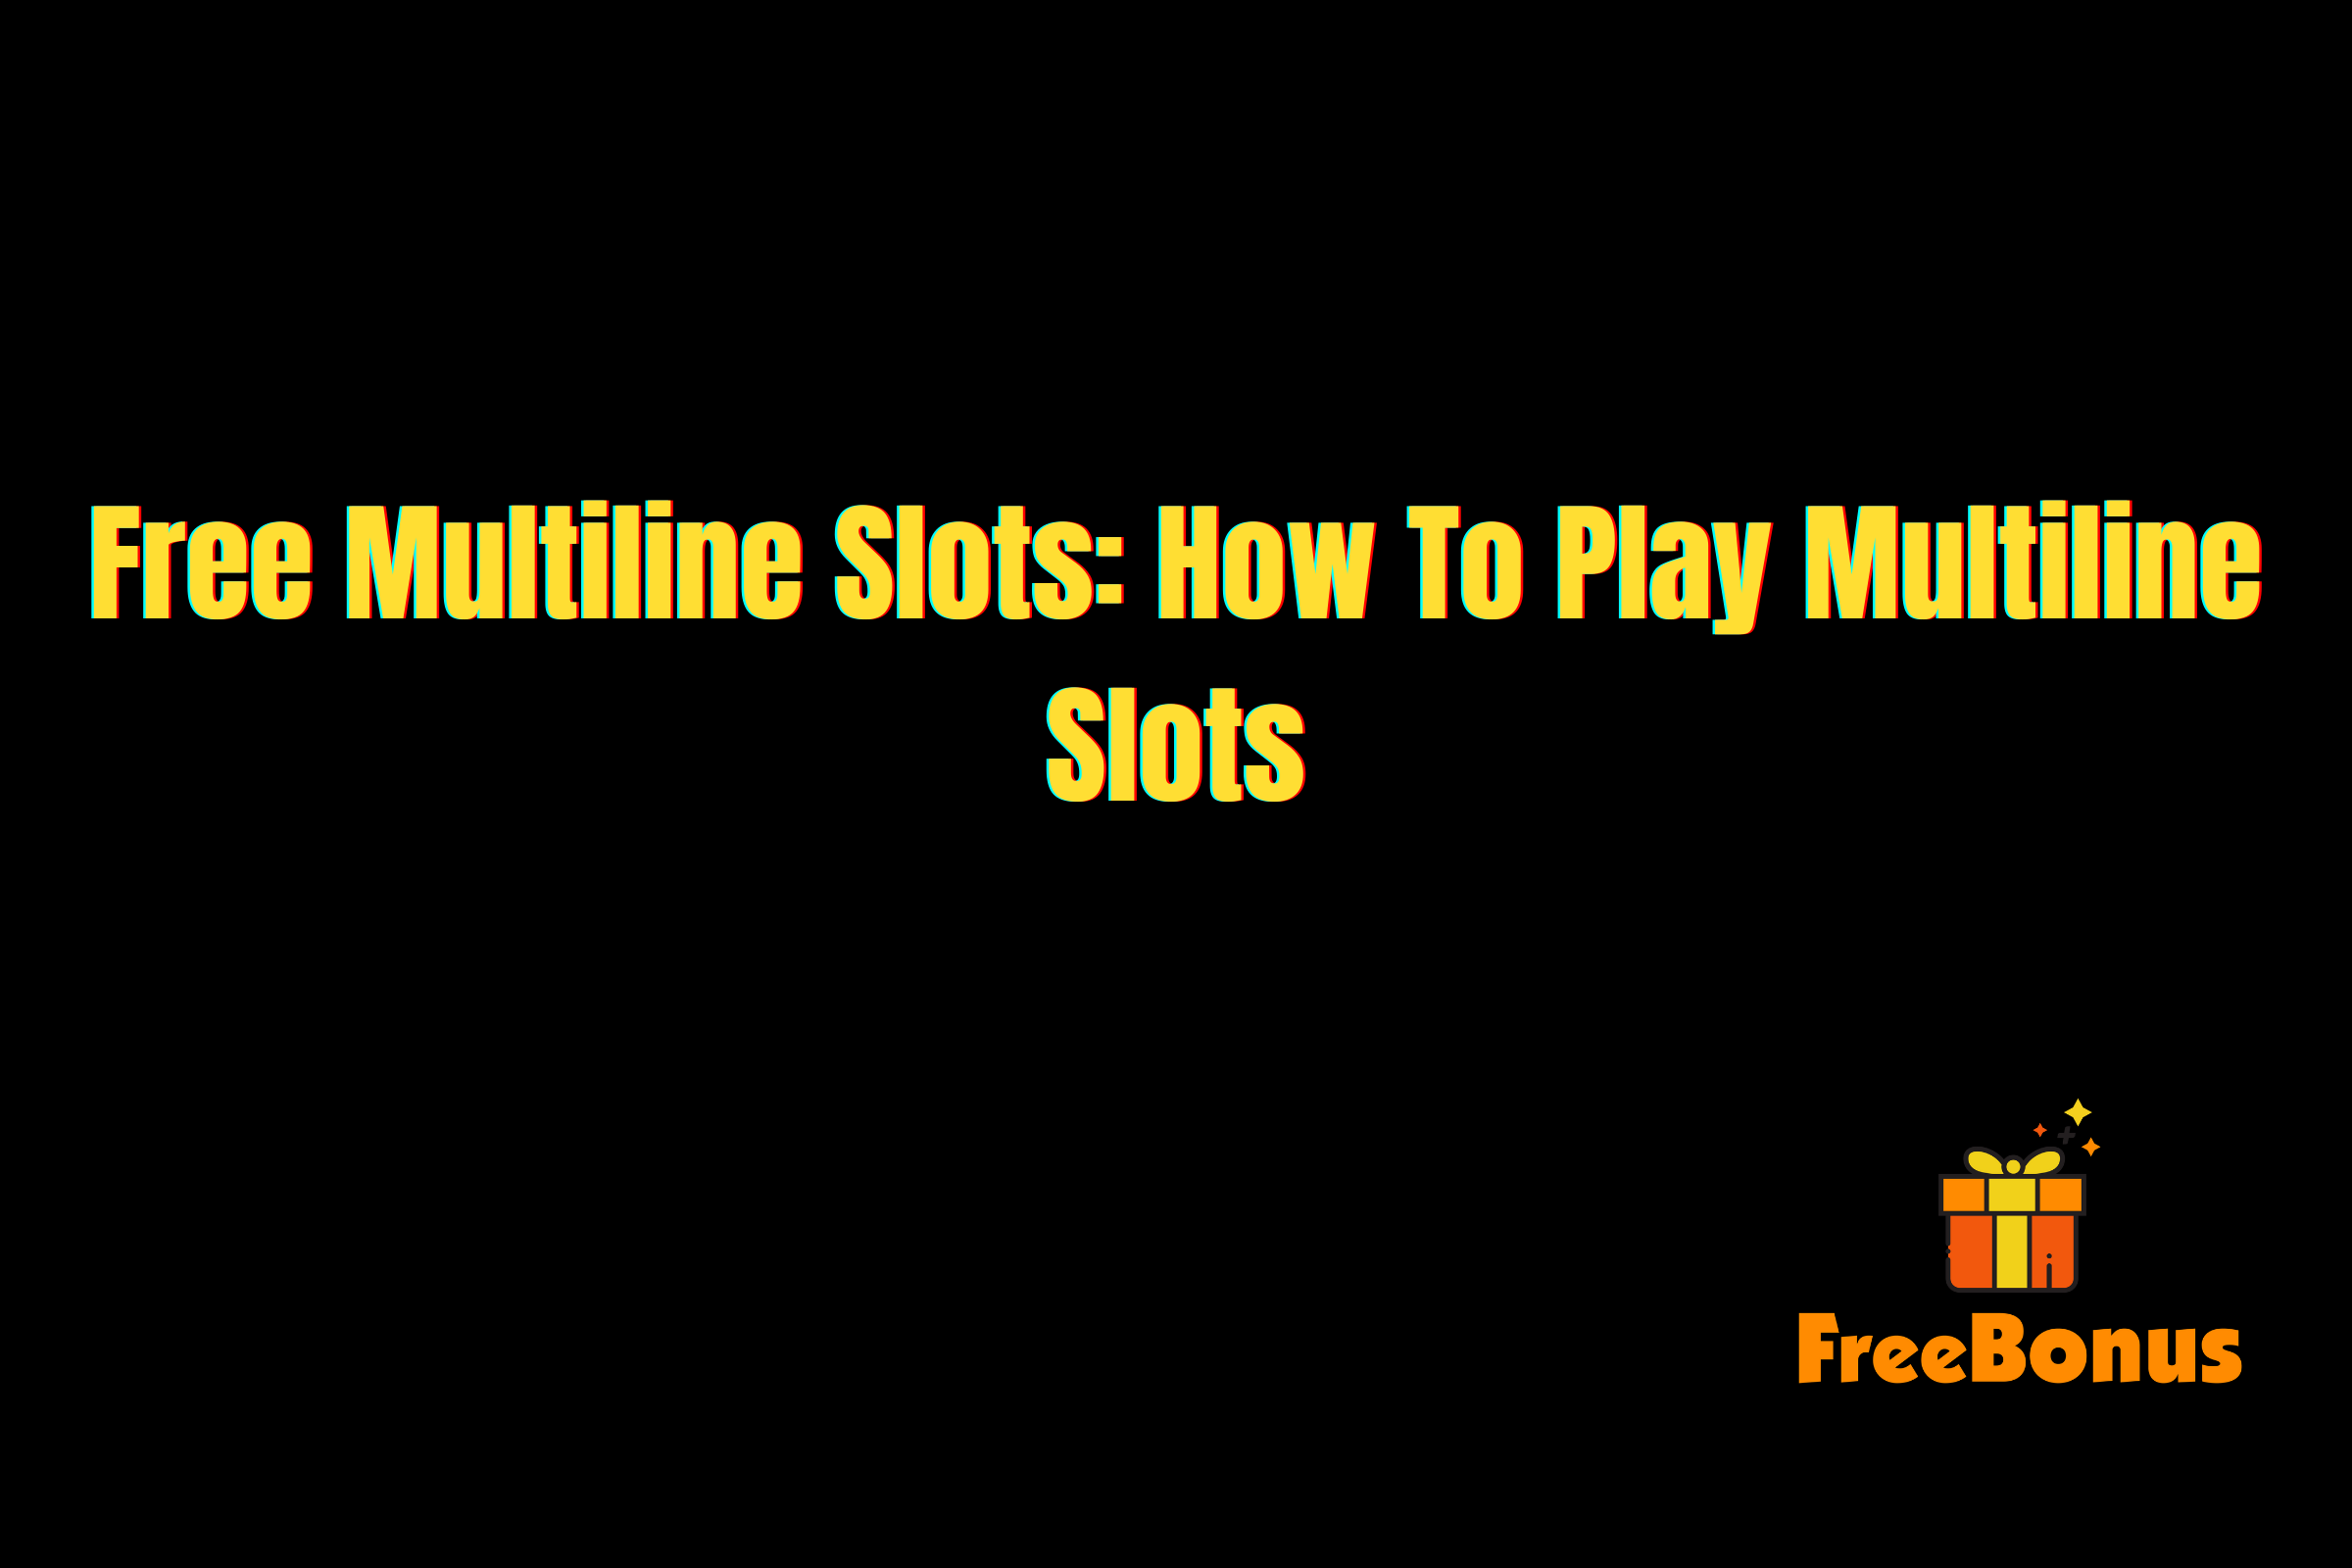 Free Multiline Slots: How To Play Multiline Slots